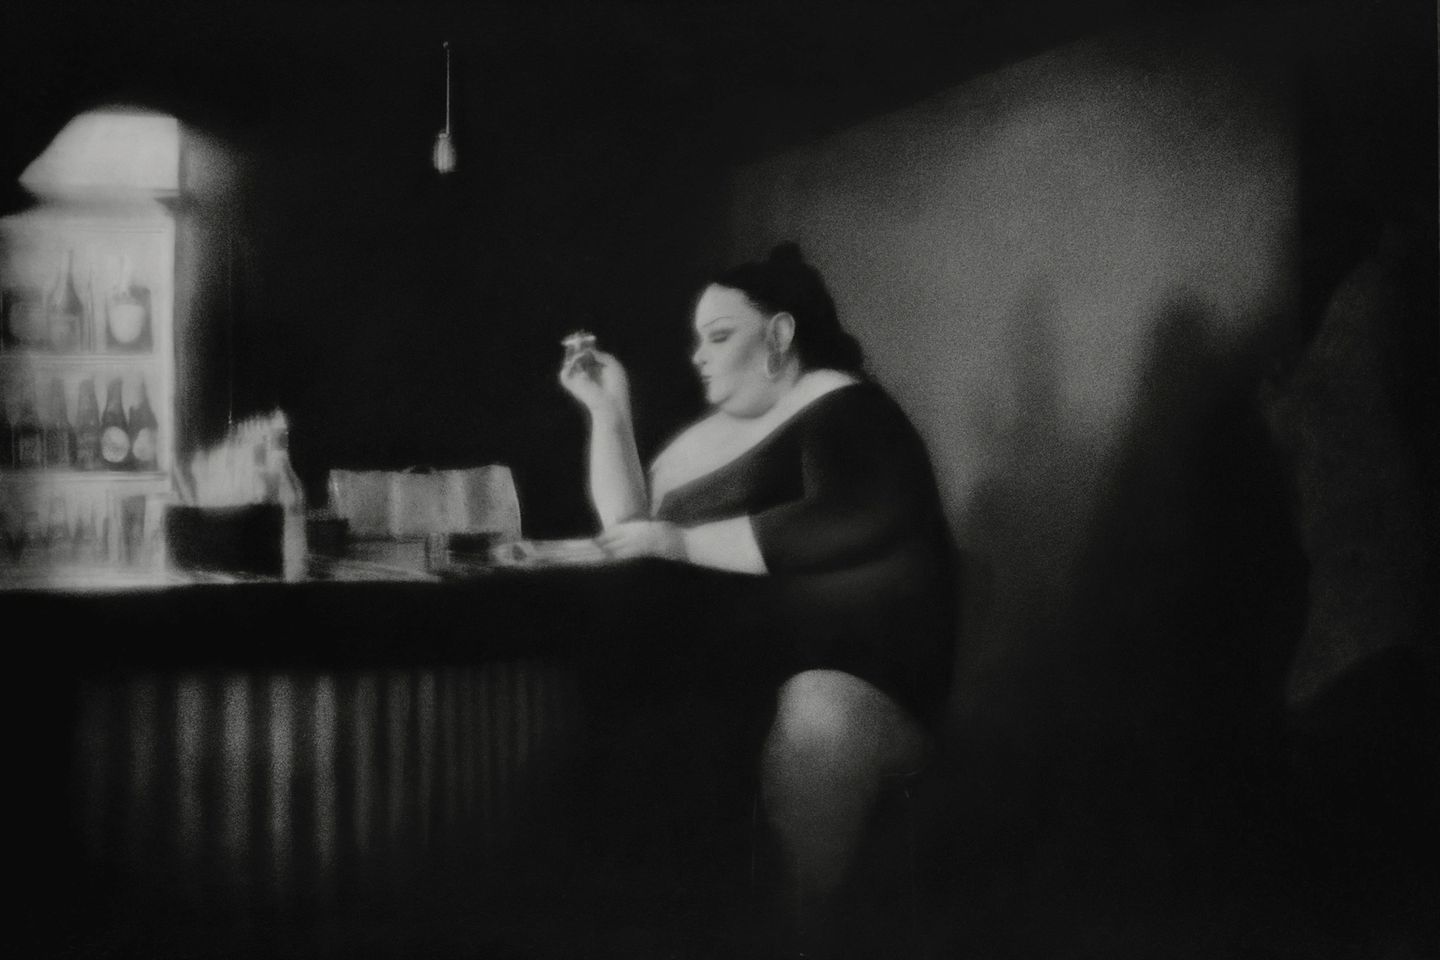 A woman sitting at the bar with her hand on her chin.